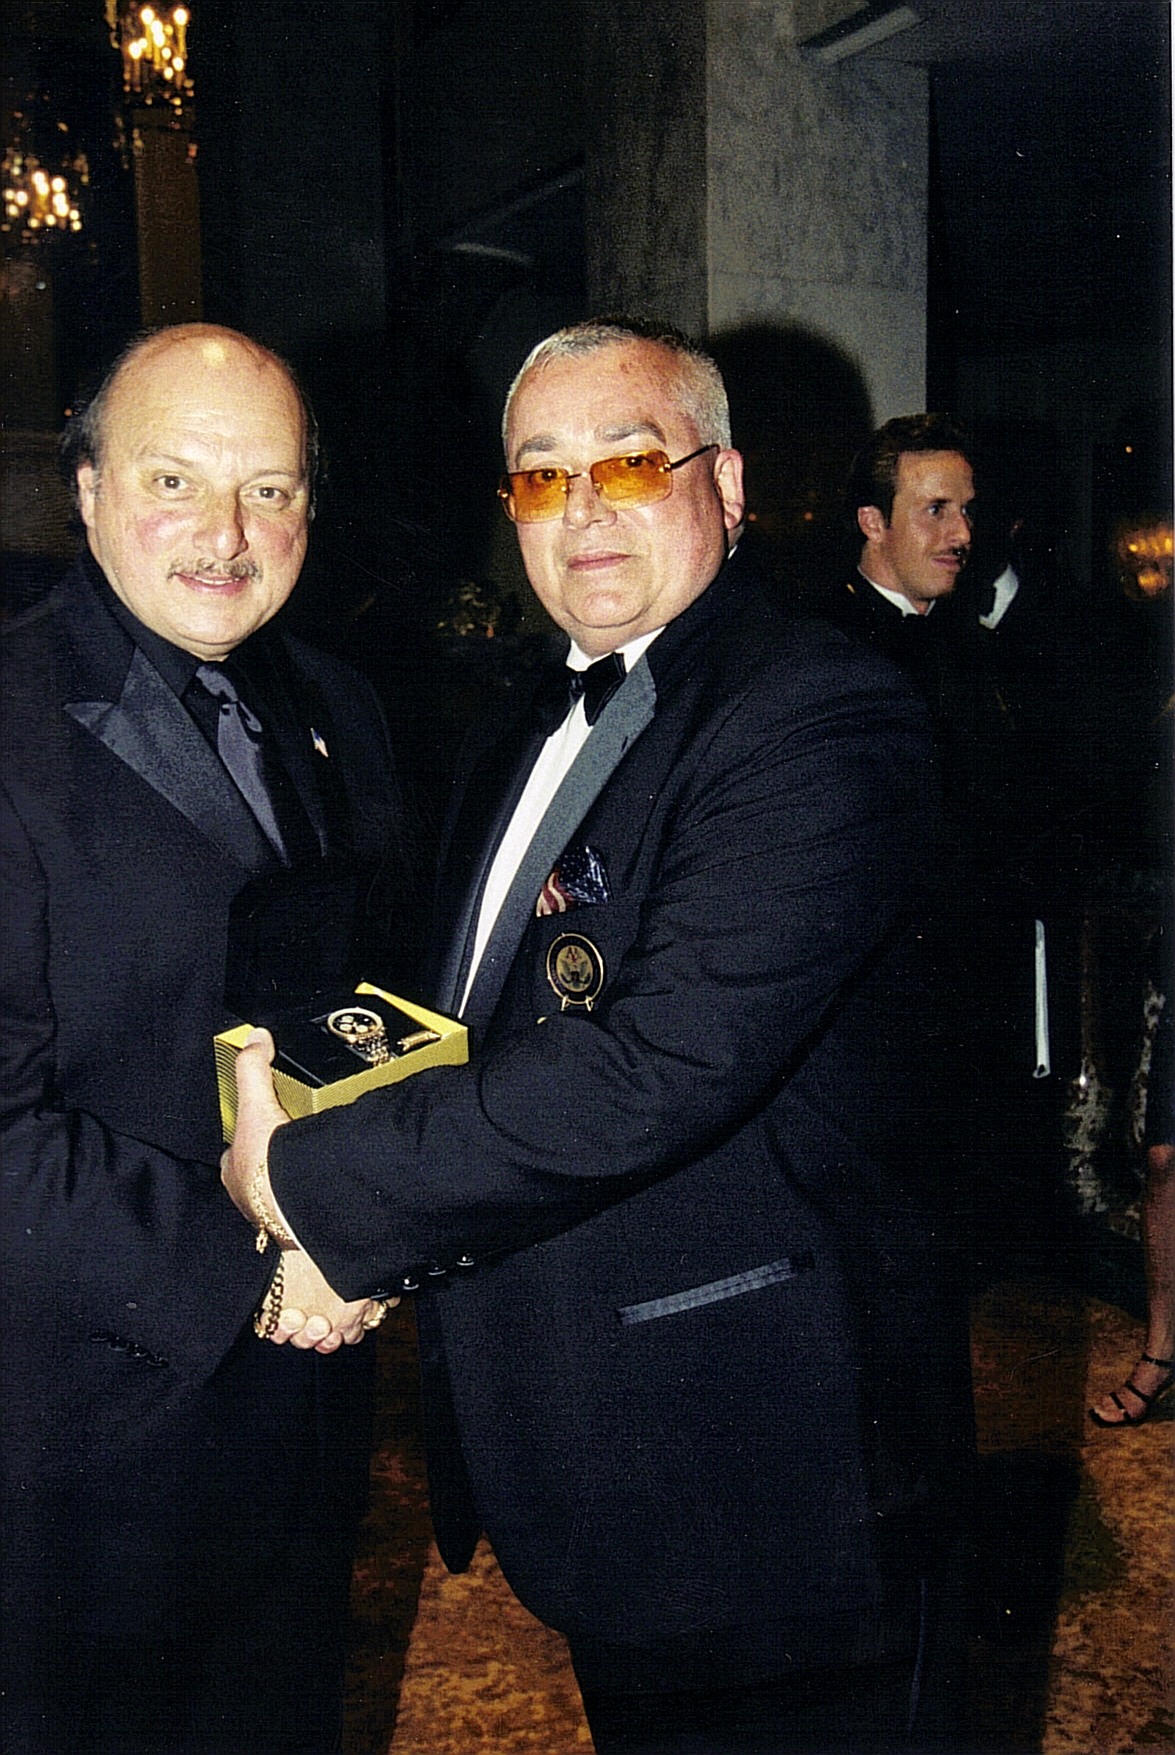 Harry and Veteran Of The Year Dennis Franz celebrate!